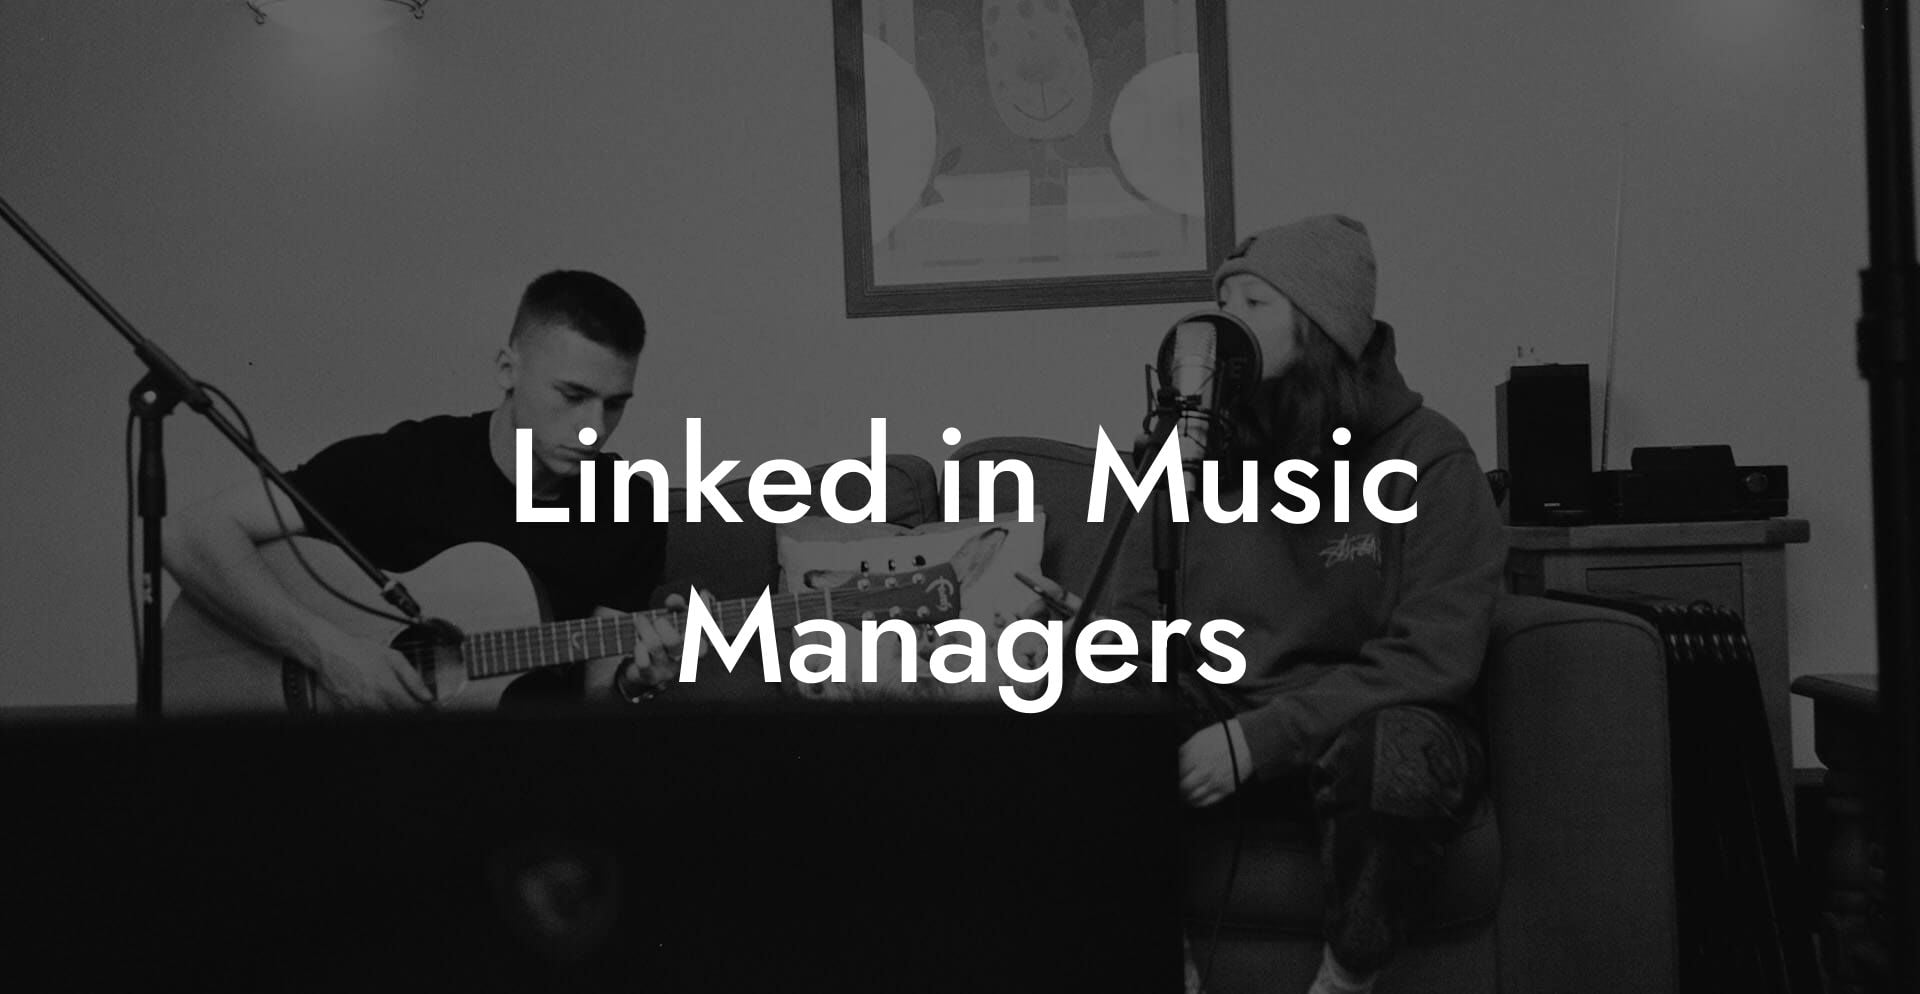 Linked in Music Managers